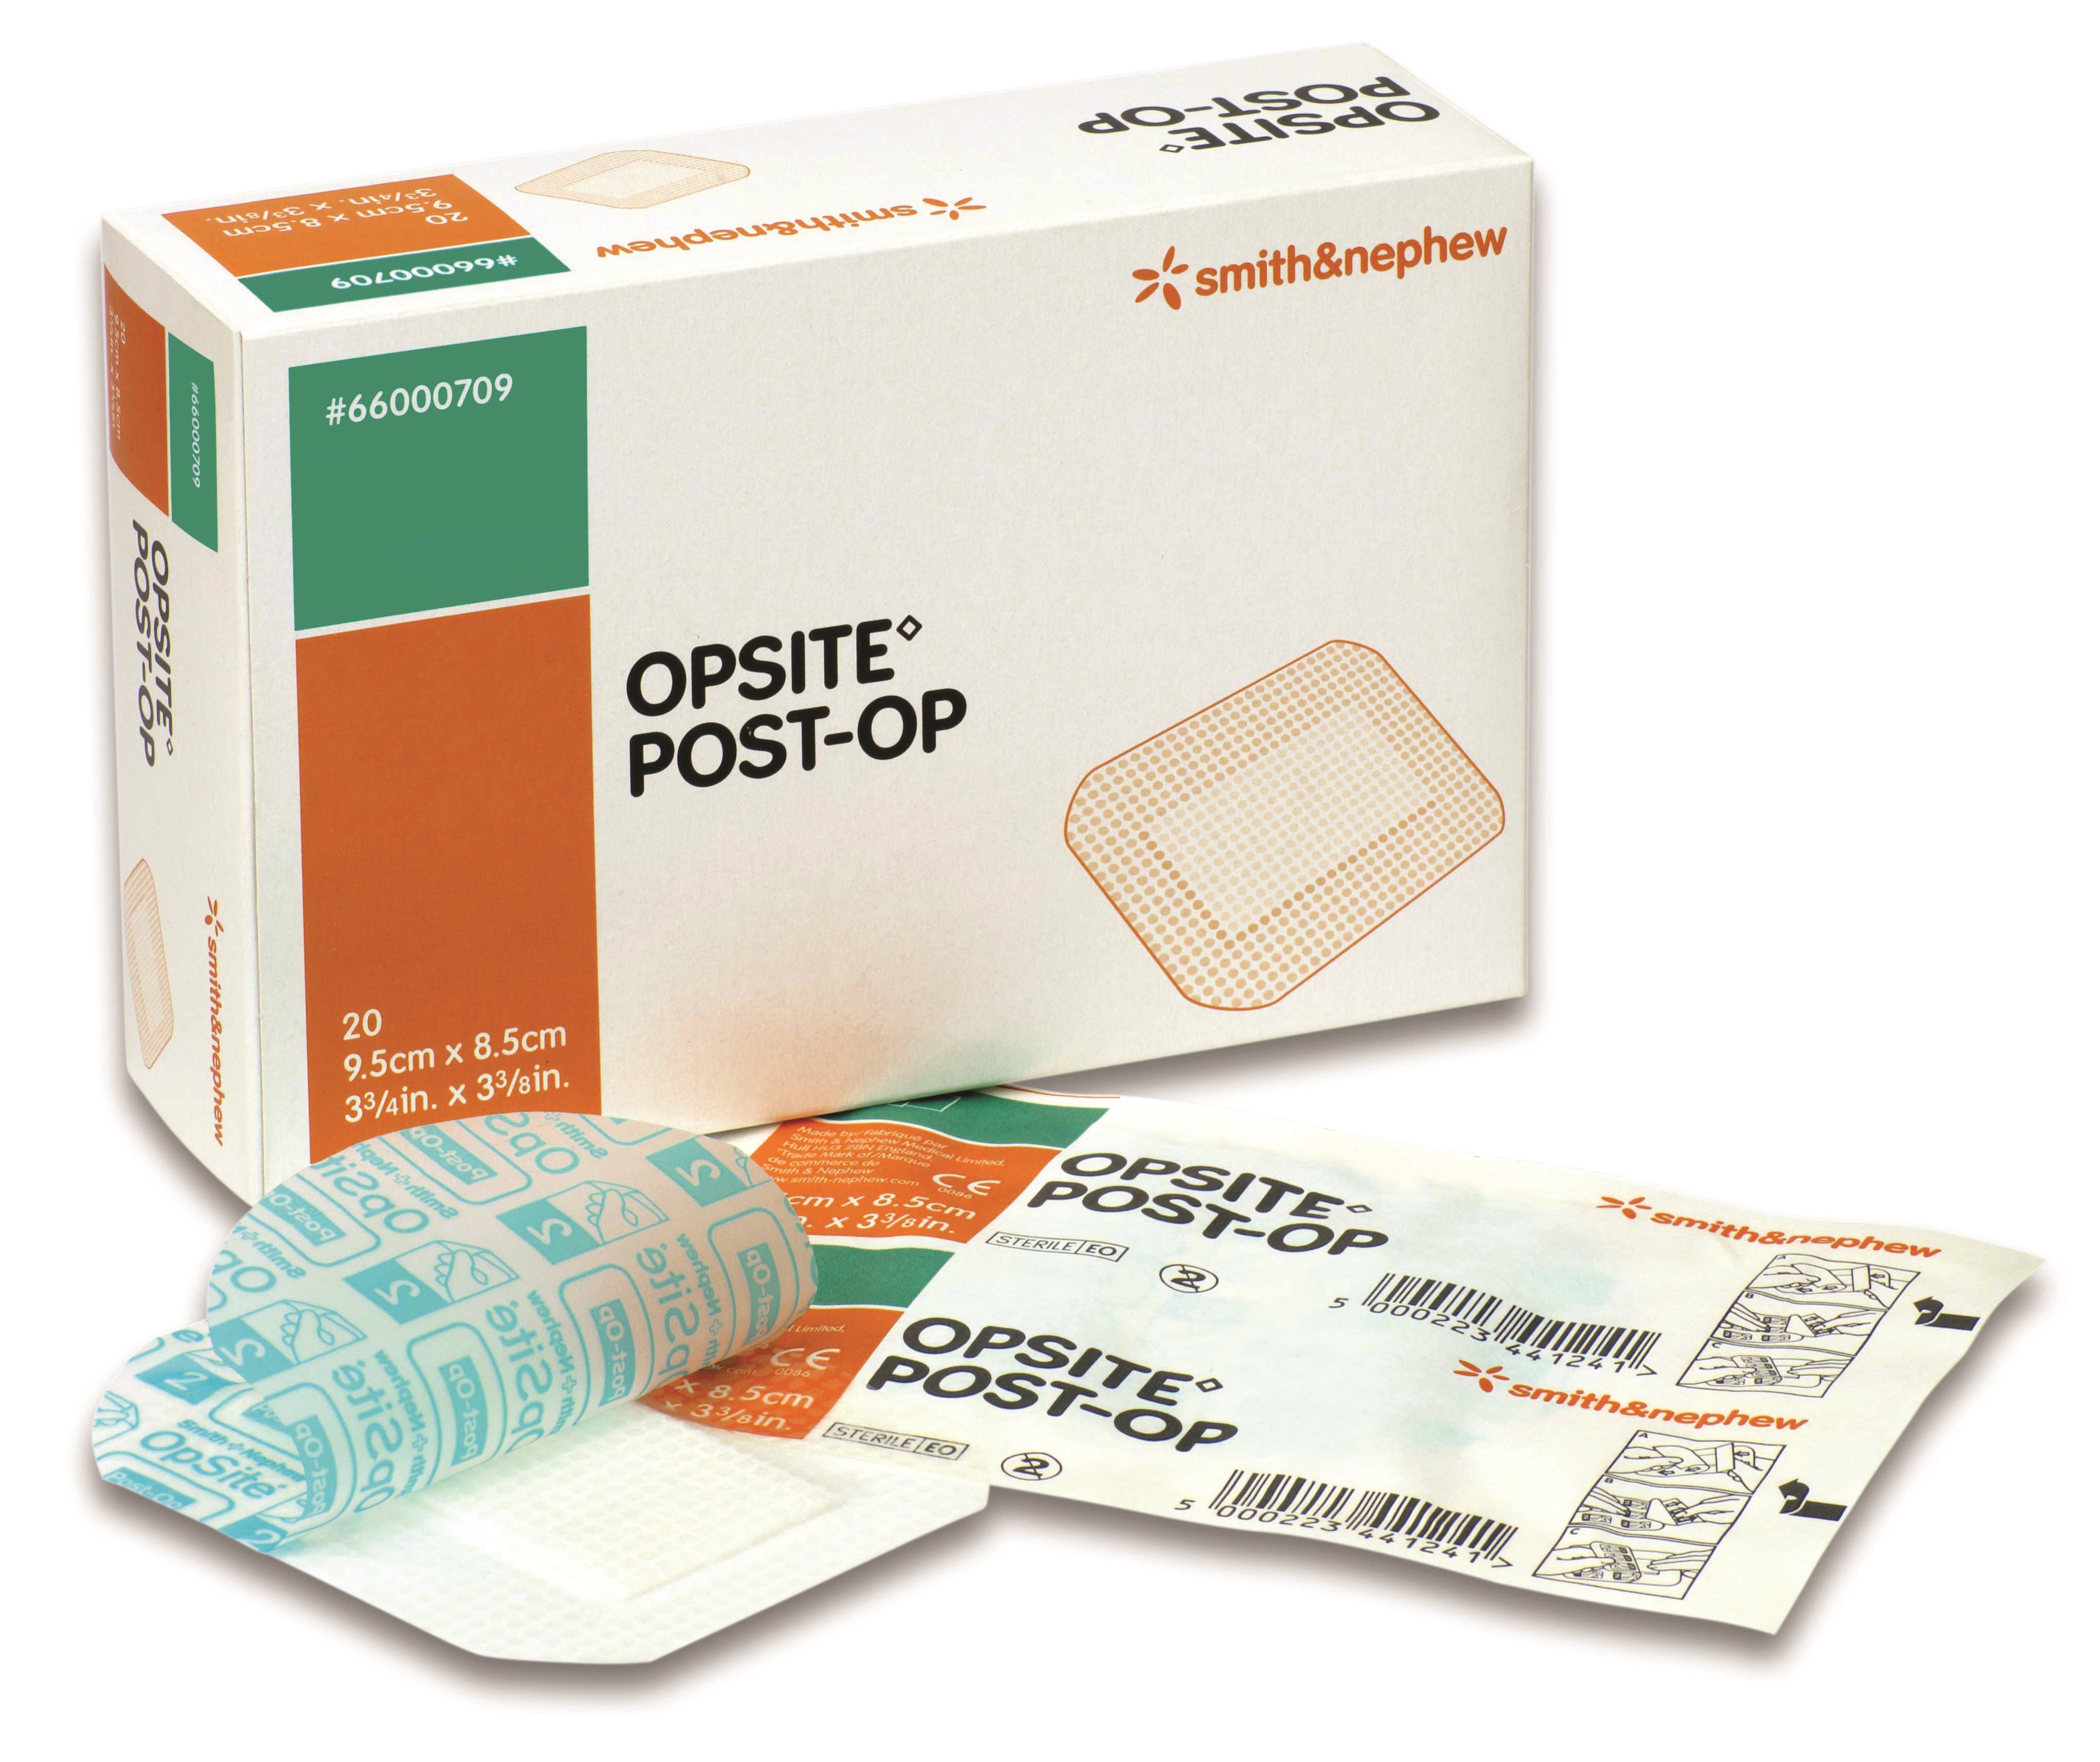 Opsite Post-Op Wound Dressing 12cm x 10cm